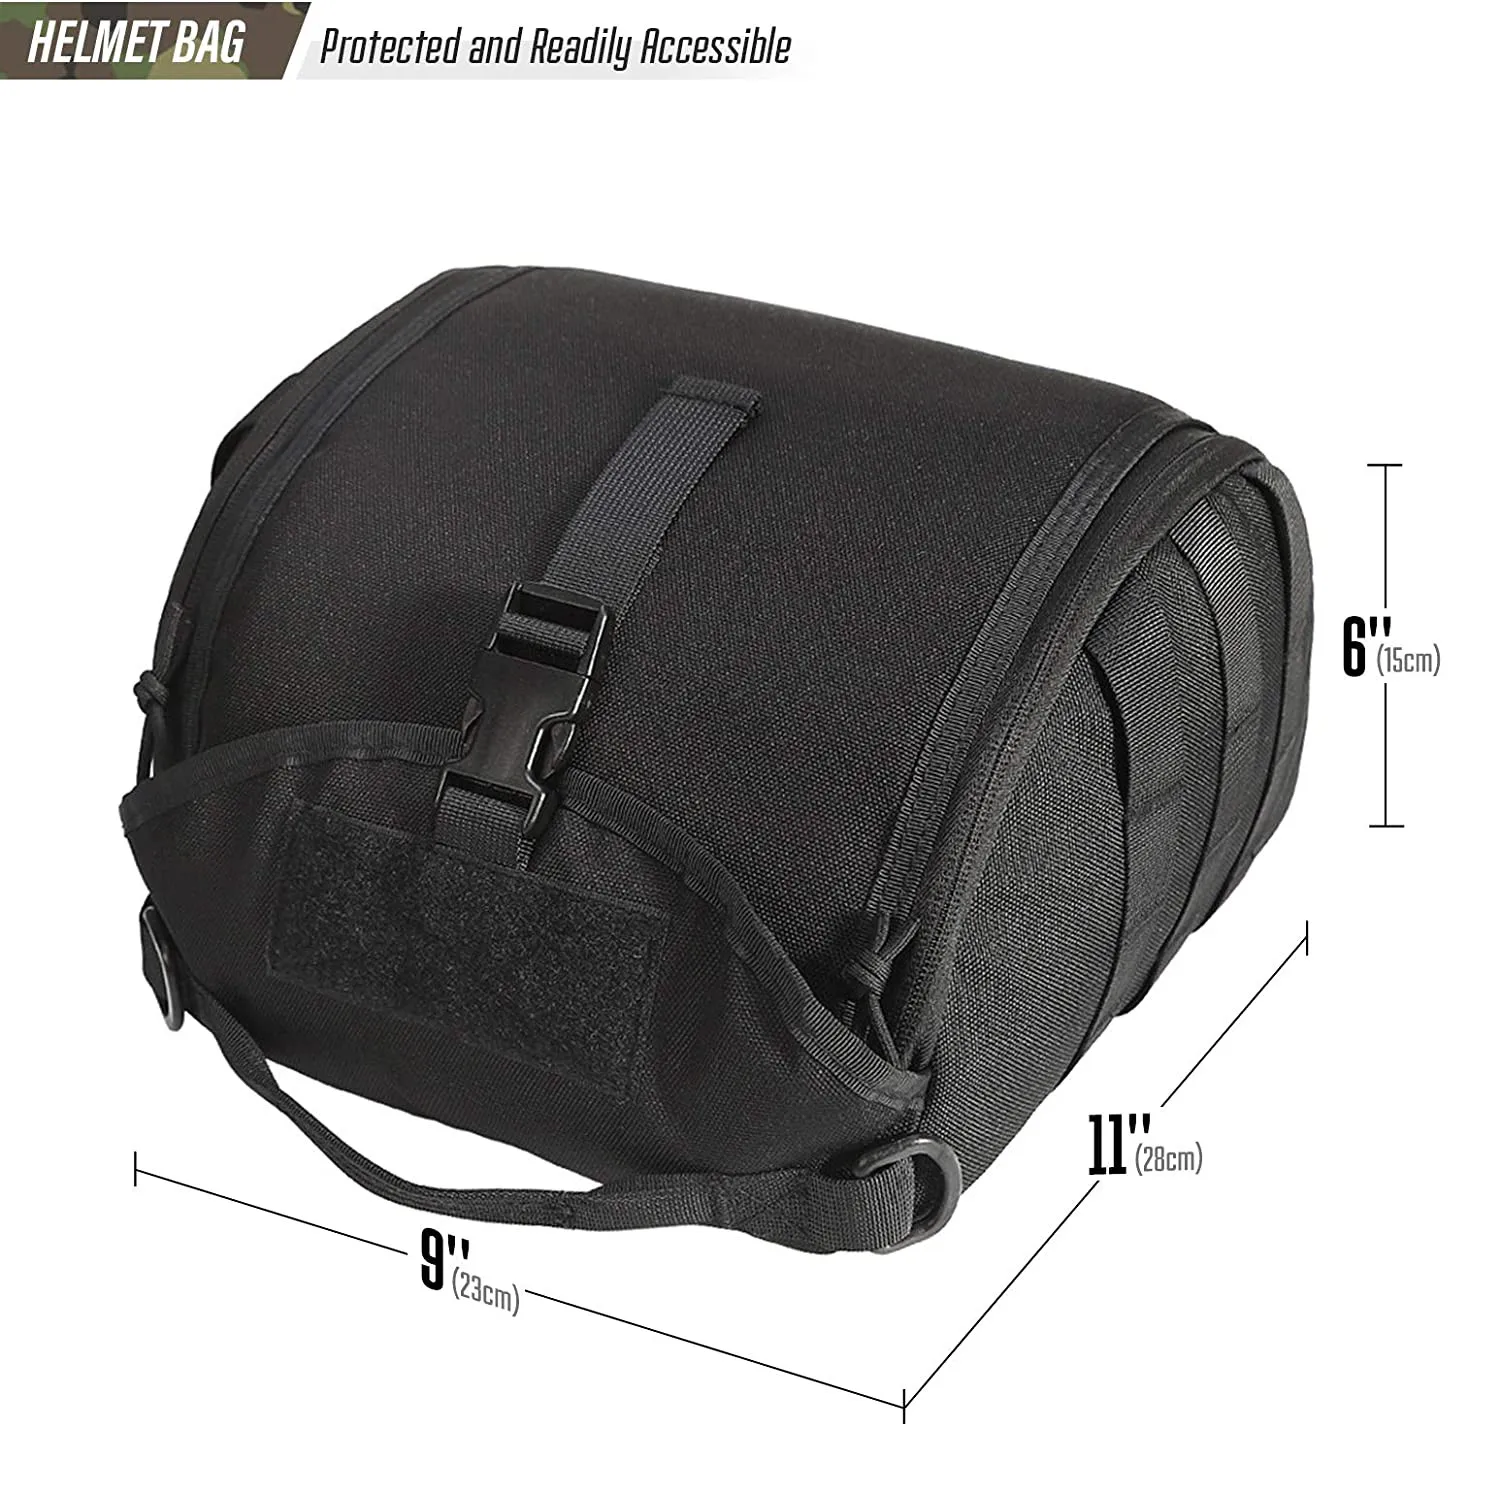 1Pcs Tactical Helmet Bag Pack Multi Purpose Molle Storage Military Carrying Pouch for Sports Hunting Shooting